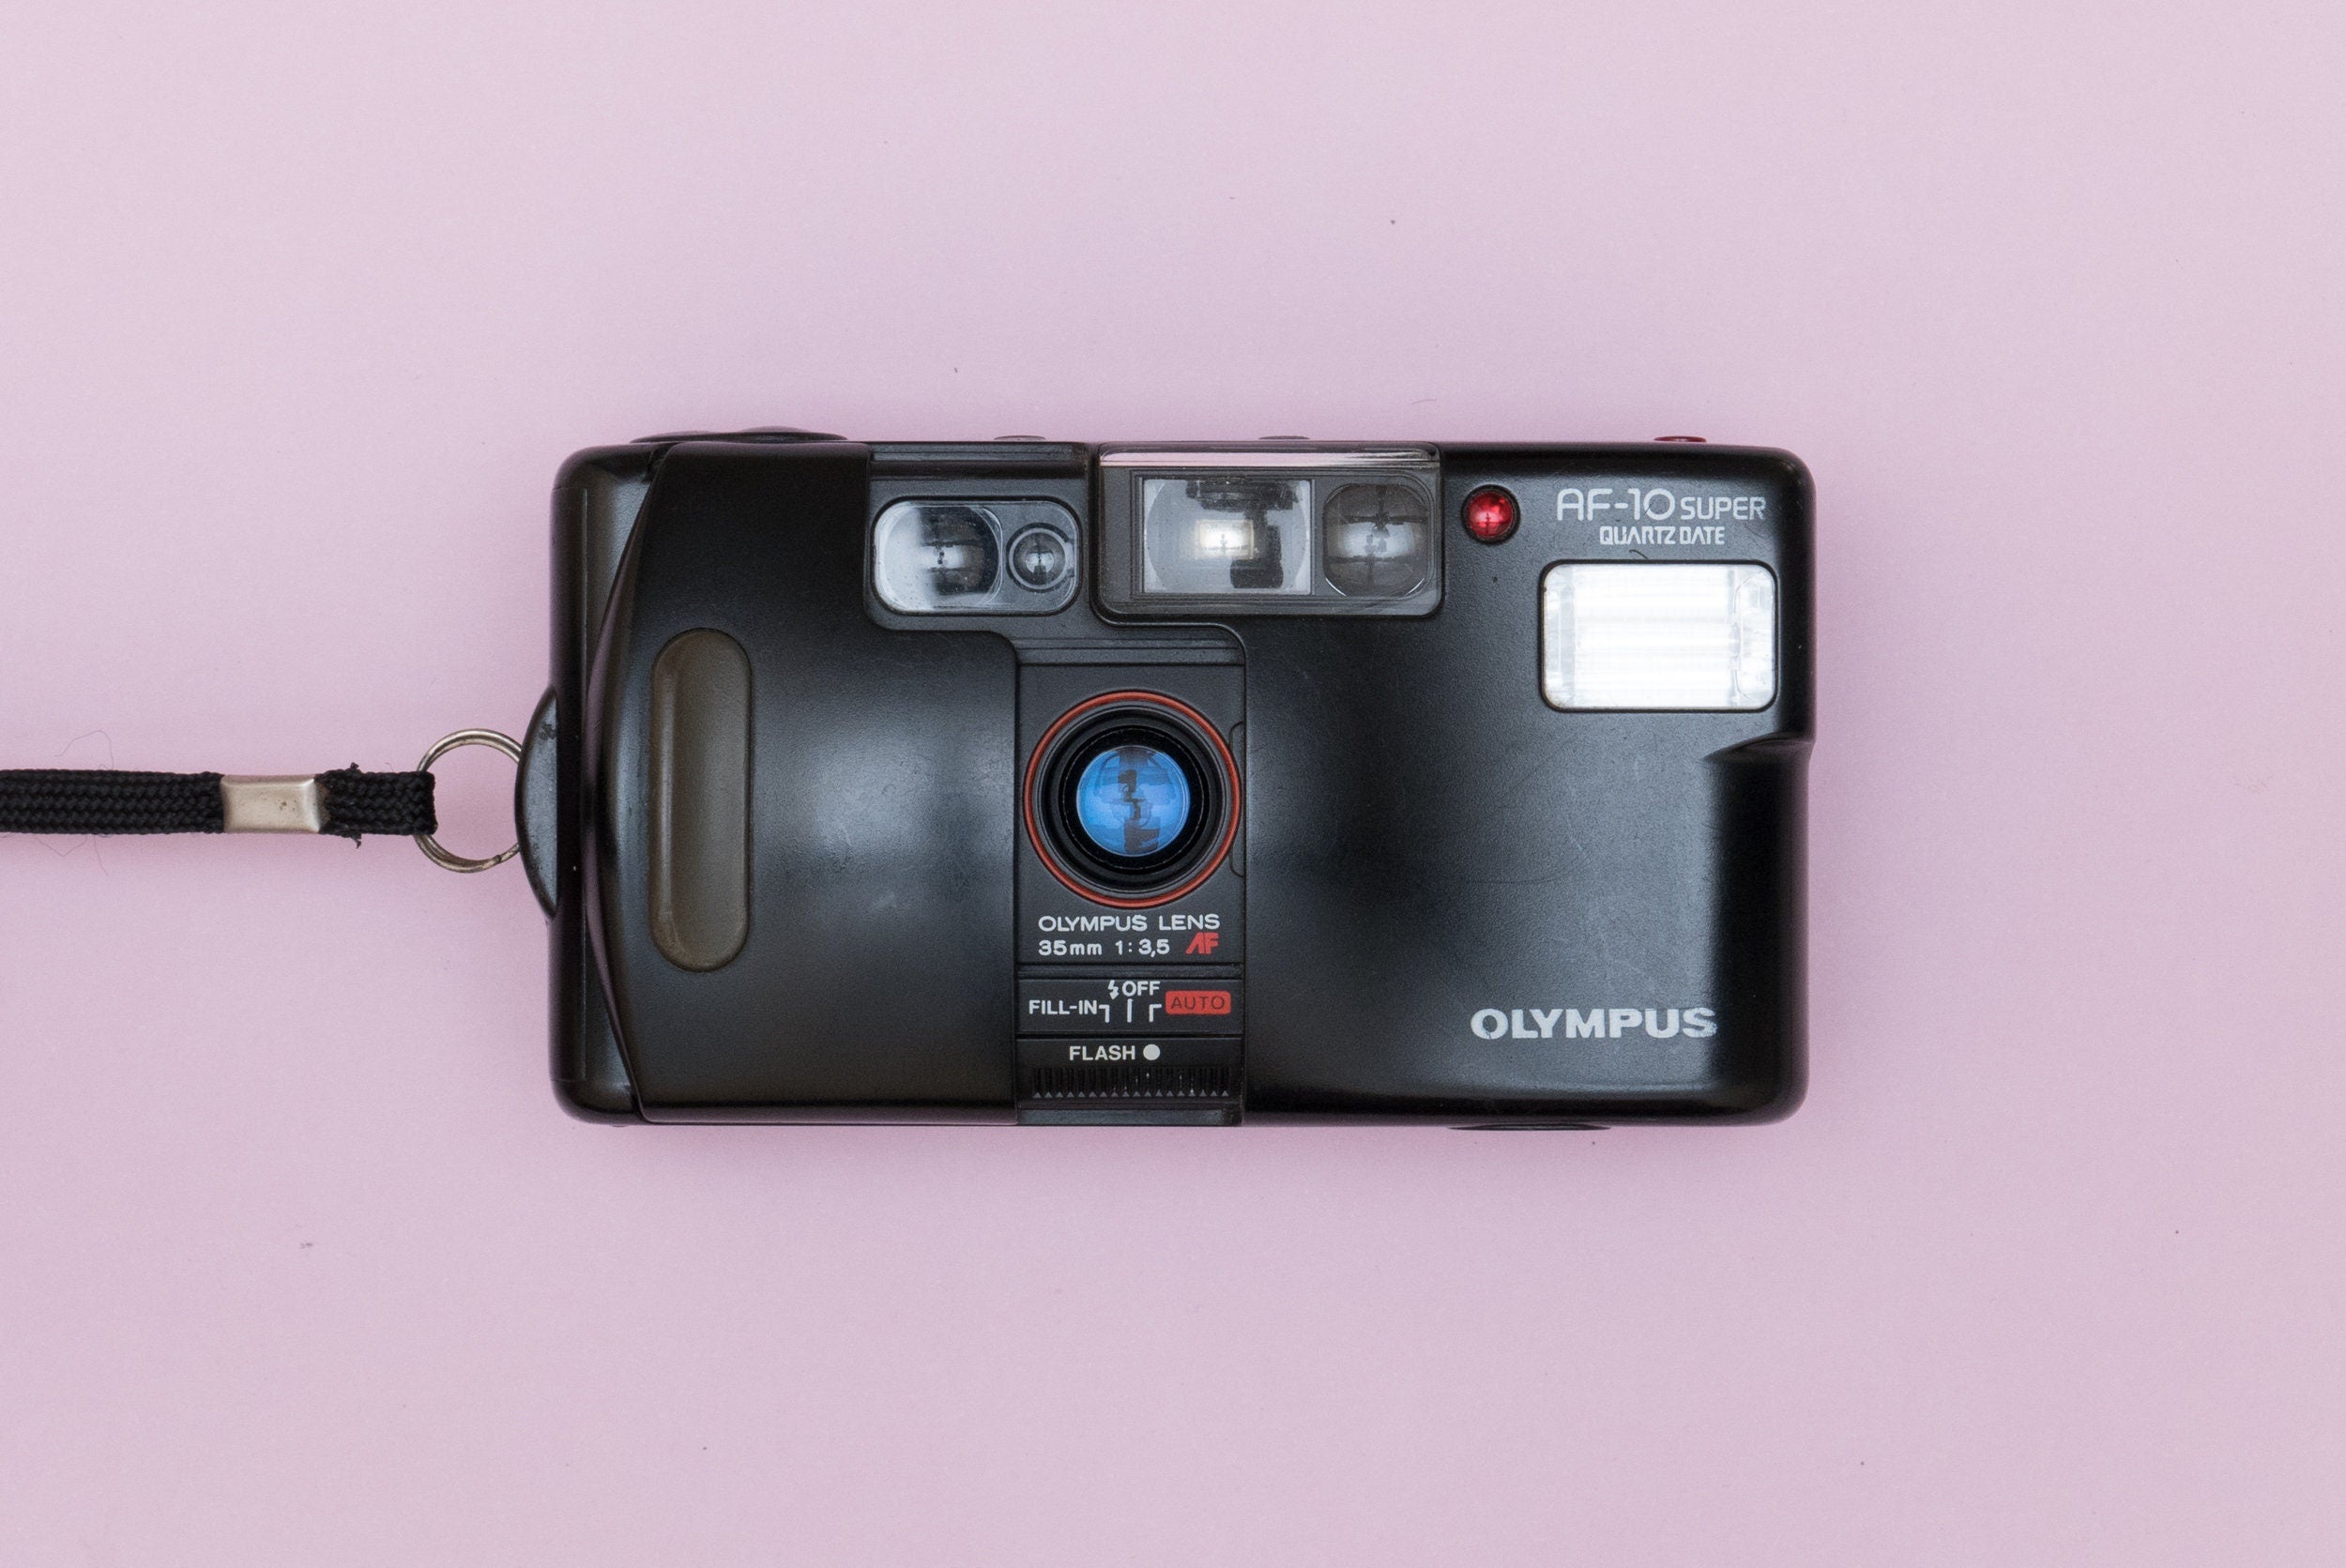 Olympus AF-10 SUPER Quartz Date Compact 35mm Point and Shoot Film Came